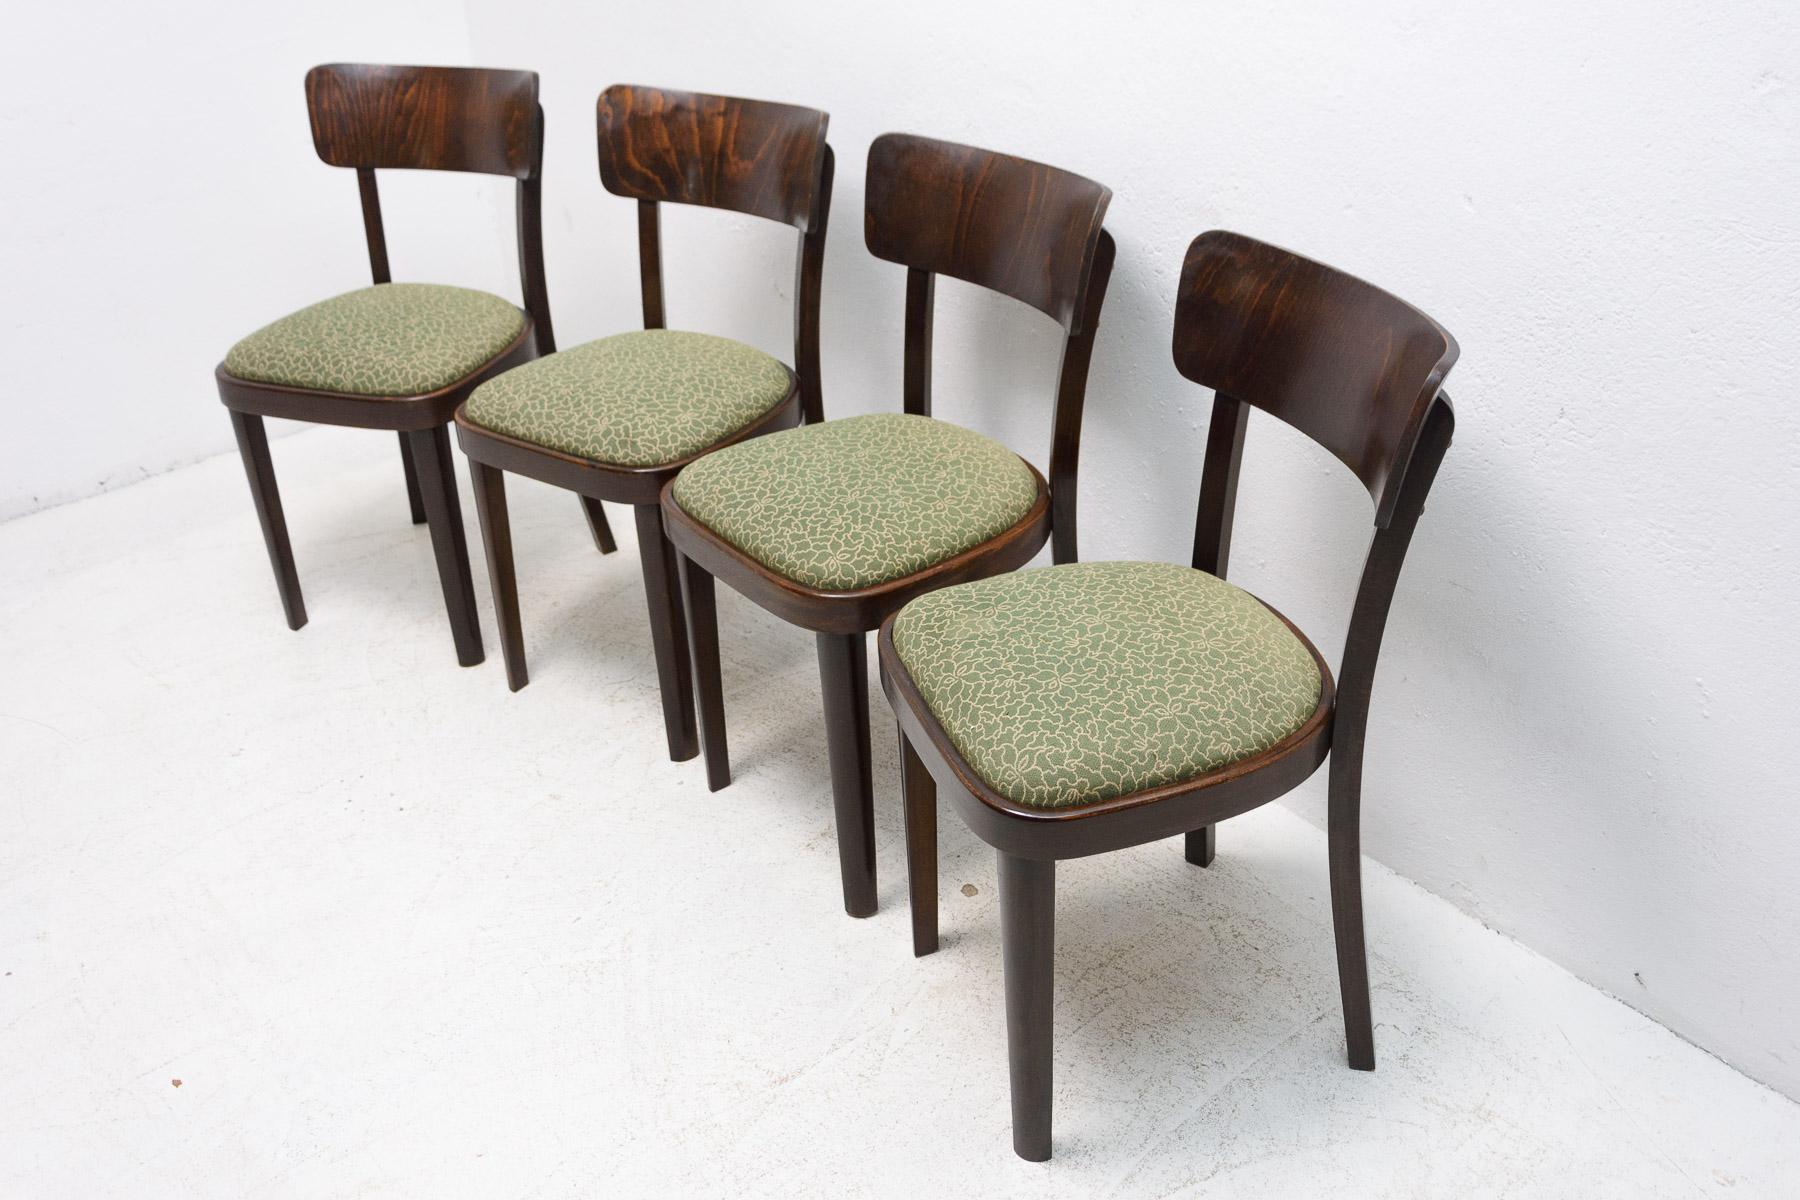 20th Century Set of Four Thonet Dining Chairs, Czechoslovakia, 1950